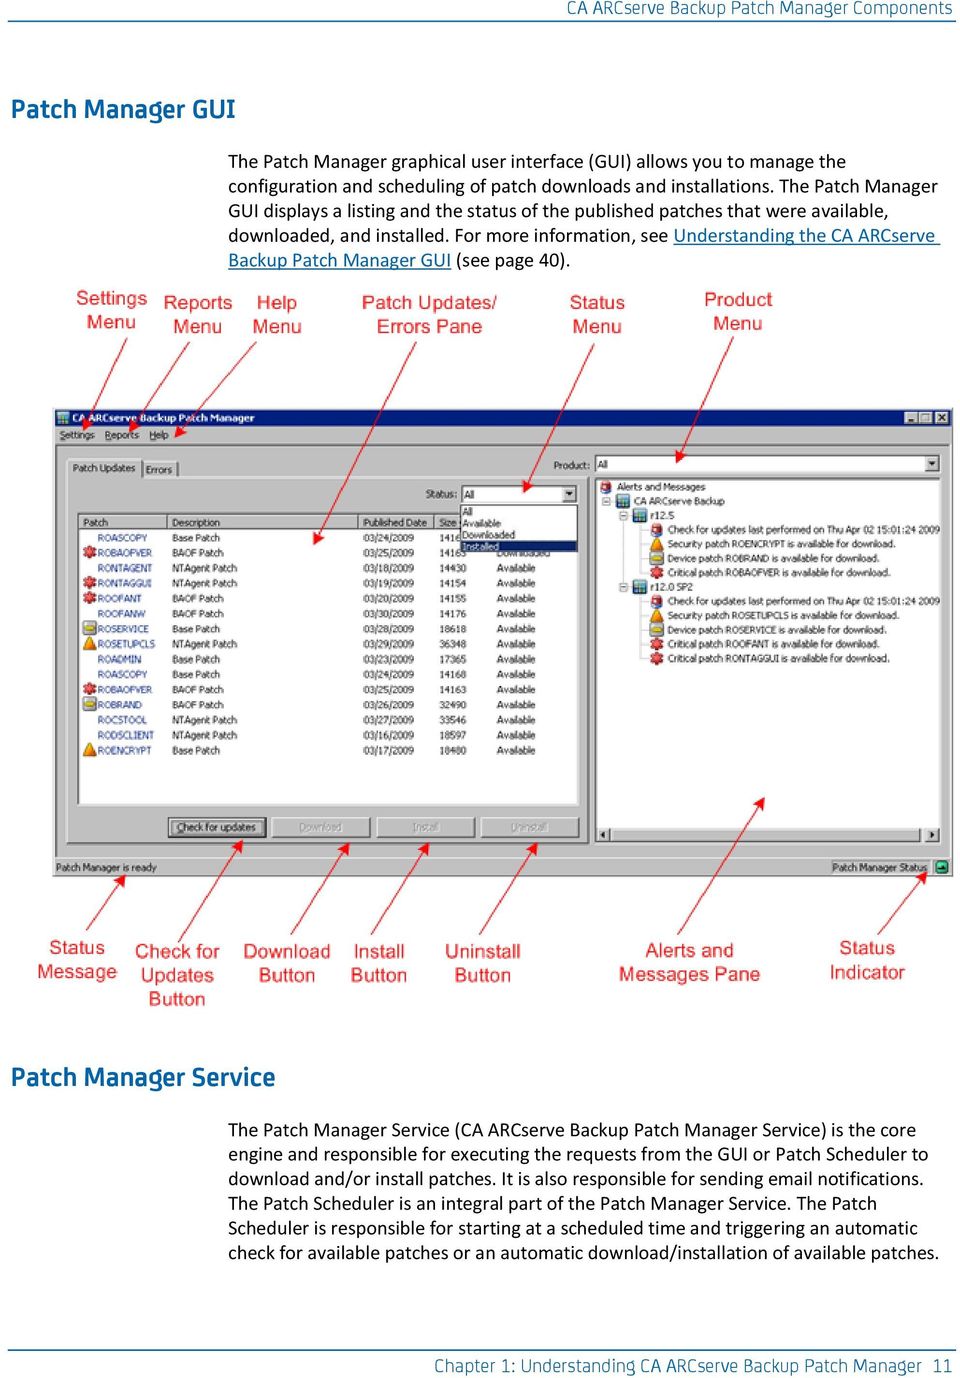 For more information, see Understanding the CA ARCserve Backup Patch Manager GUI (see page 40).